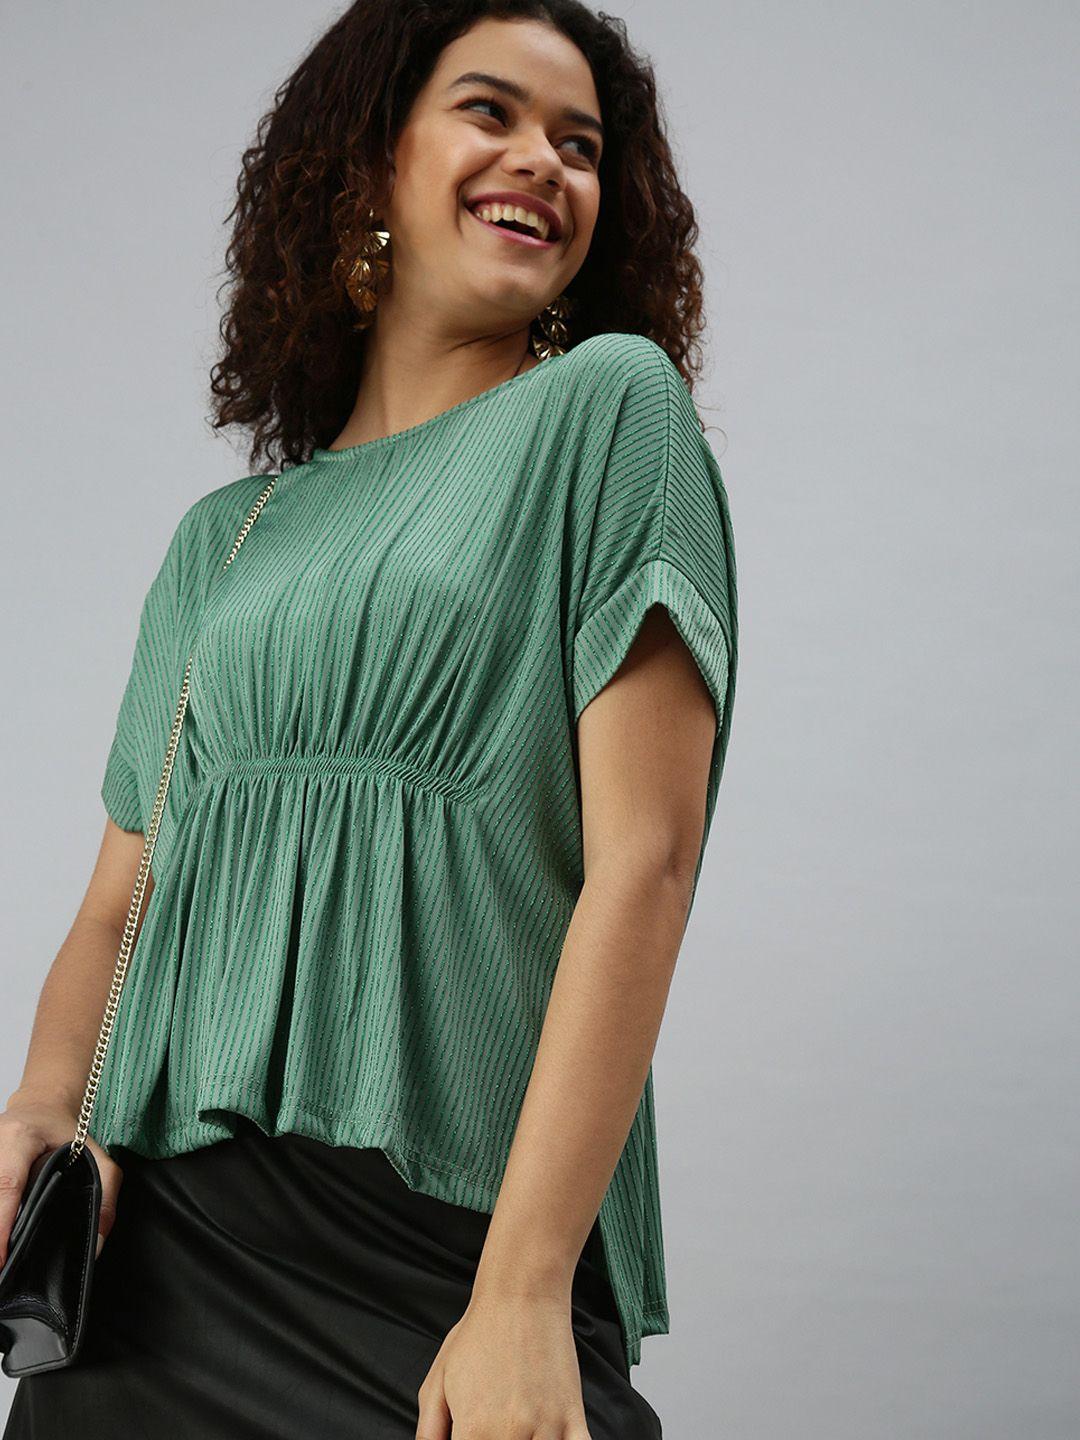 showoff green cinched waist top